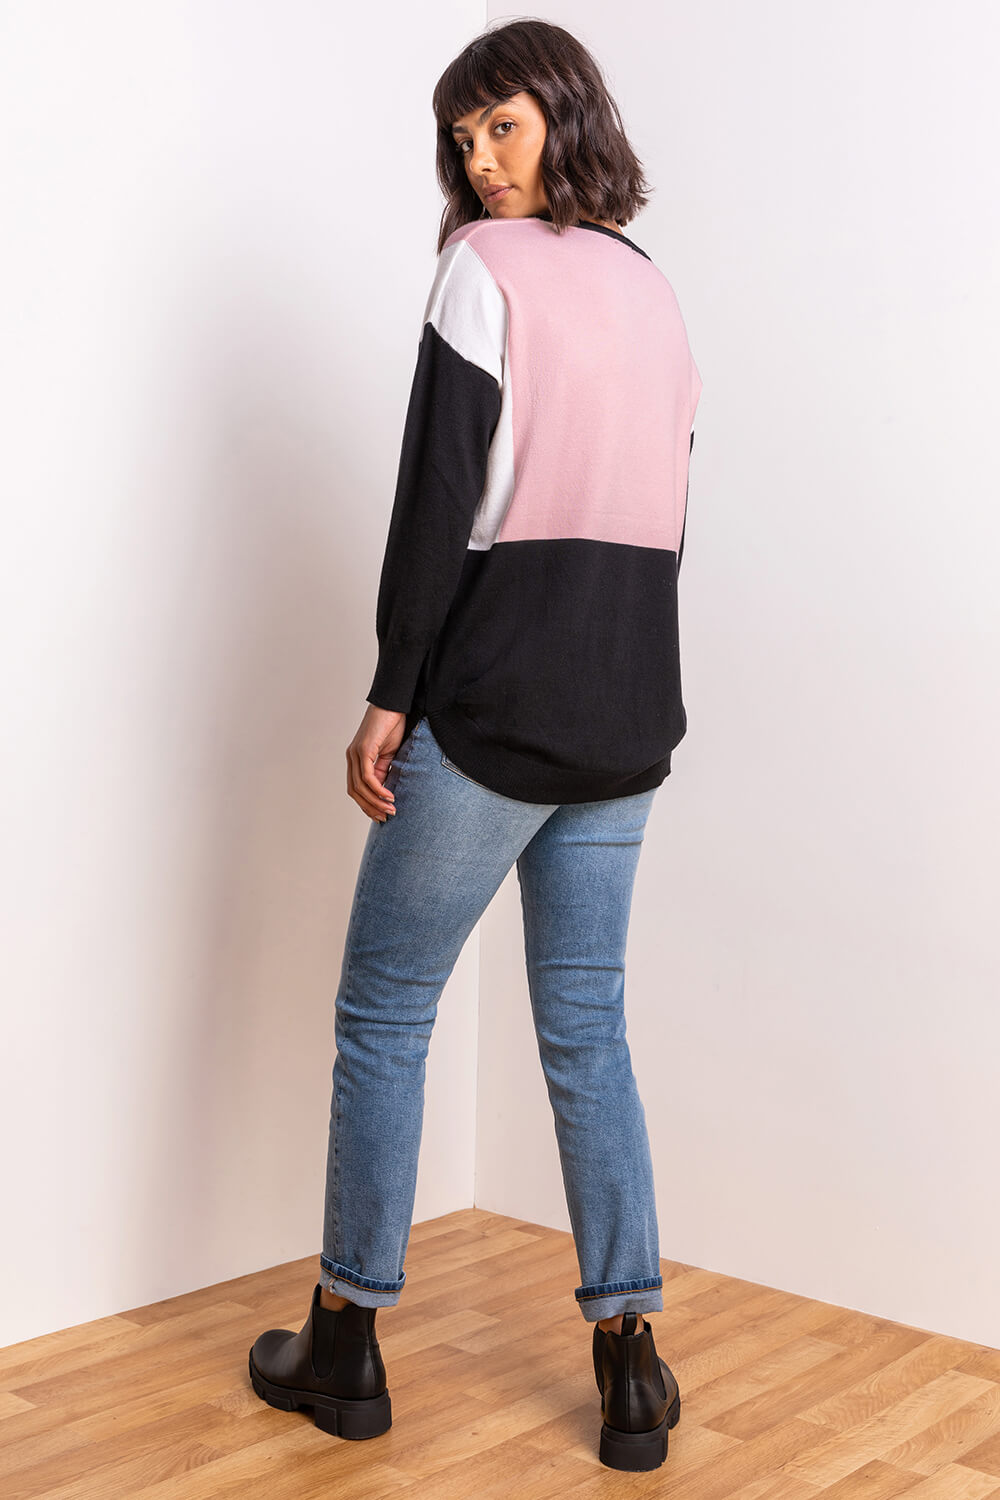 PINK Colour Block Round Neck Jumper, Image 2 of 5